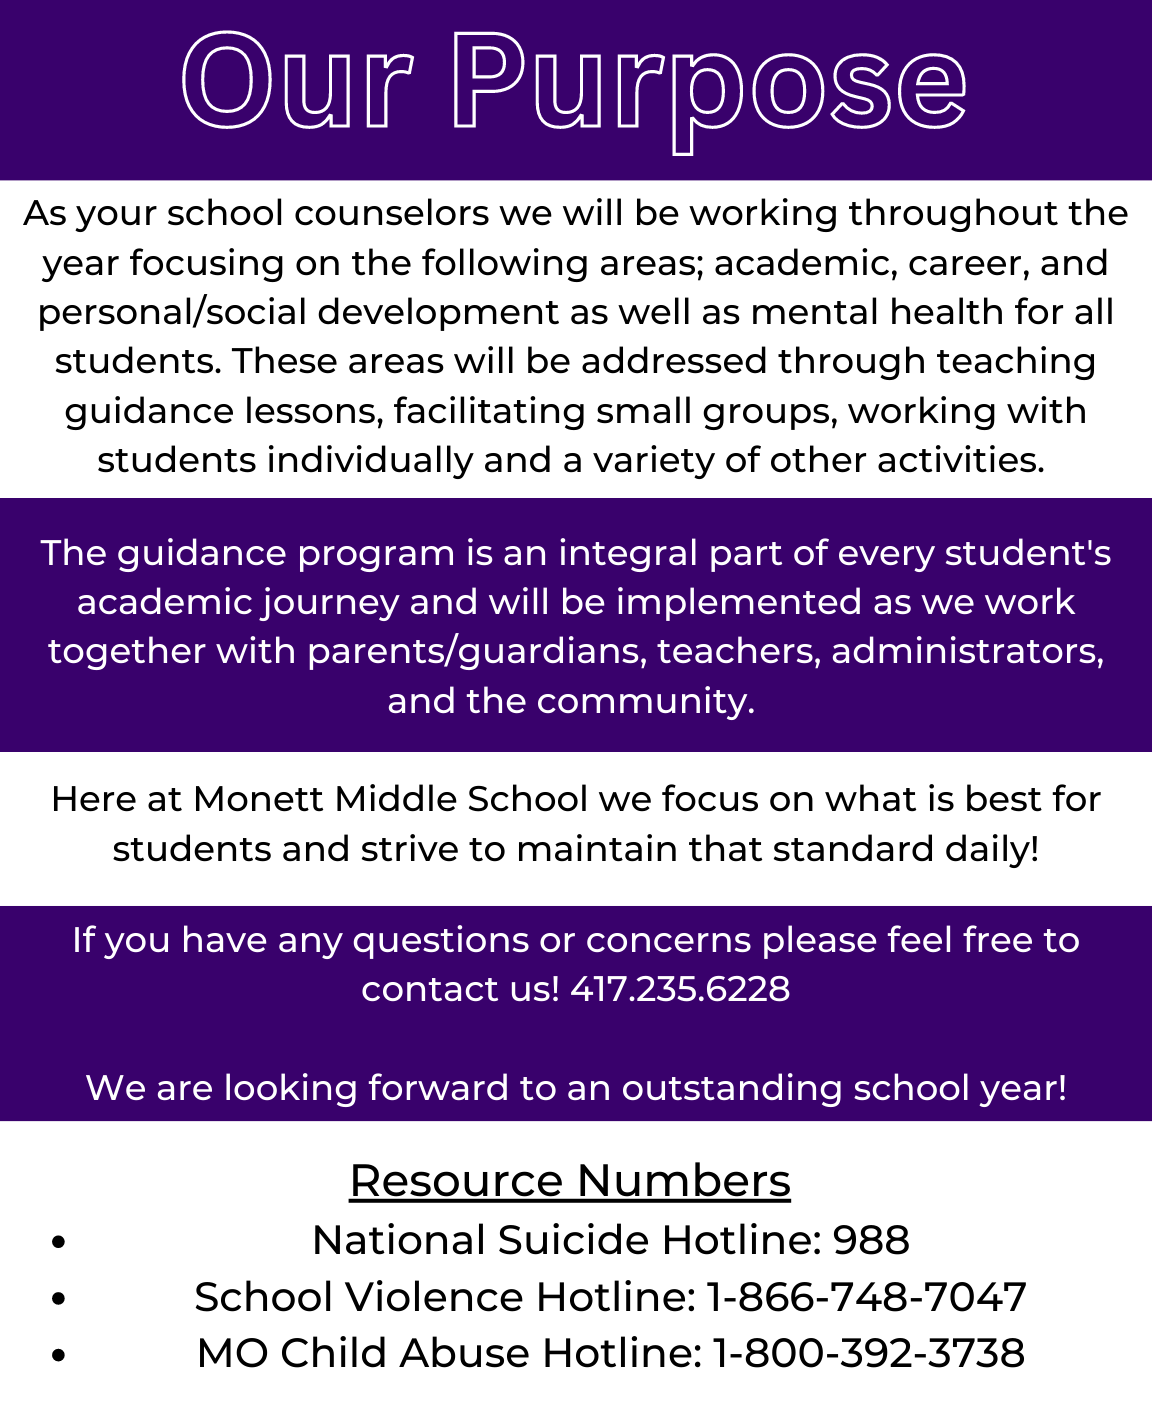 As your school counselors we will be working throughout the year focusing on the following areas; academic, career, and personal/social development as well as mental health for all students. These areas will be addressed through teaching guidance lessons, facilitating small groups, working with students individually and a variety of other activities.   The guidance program is an integral part of every student's academic journey and will be implemented as we work together with parents/guardians, teachers, administrators, and the community.   Here at Monett Middle School we focus on what is best for students and strive to maintain that standard daily!  If you have any questions or concerns please feel free to contact us! 417.235.6228  We are looking forward to an outstanding school year!  Resource Numbers  National Suicide Hotline: 988 School Violence Hotline: 1-866-748-7047 MO Child Abuse Hotline: 1-800-392-3738